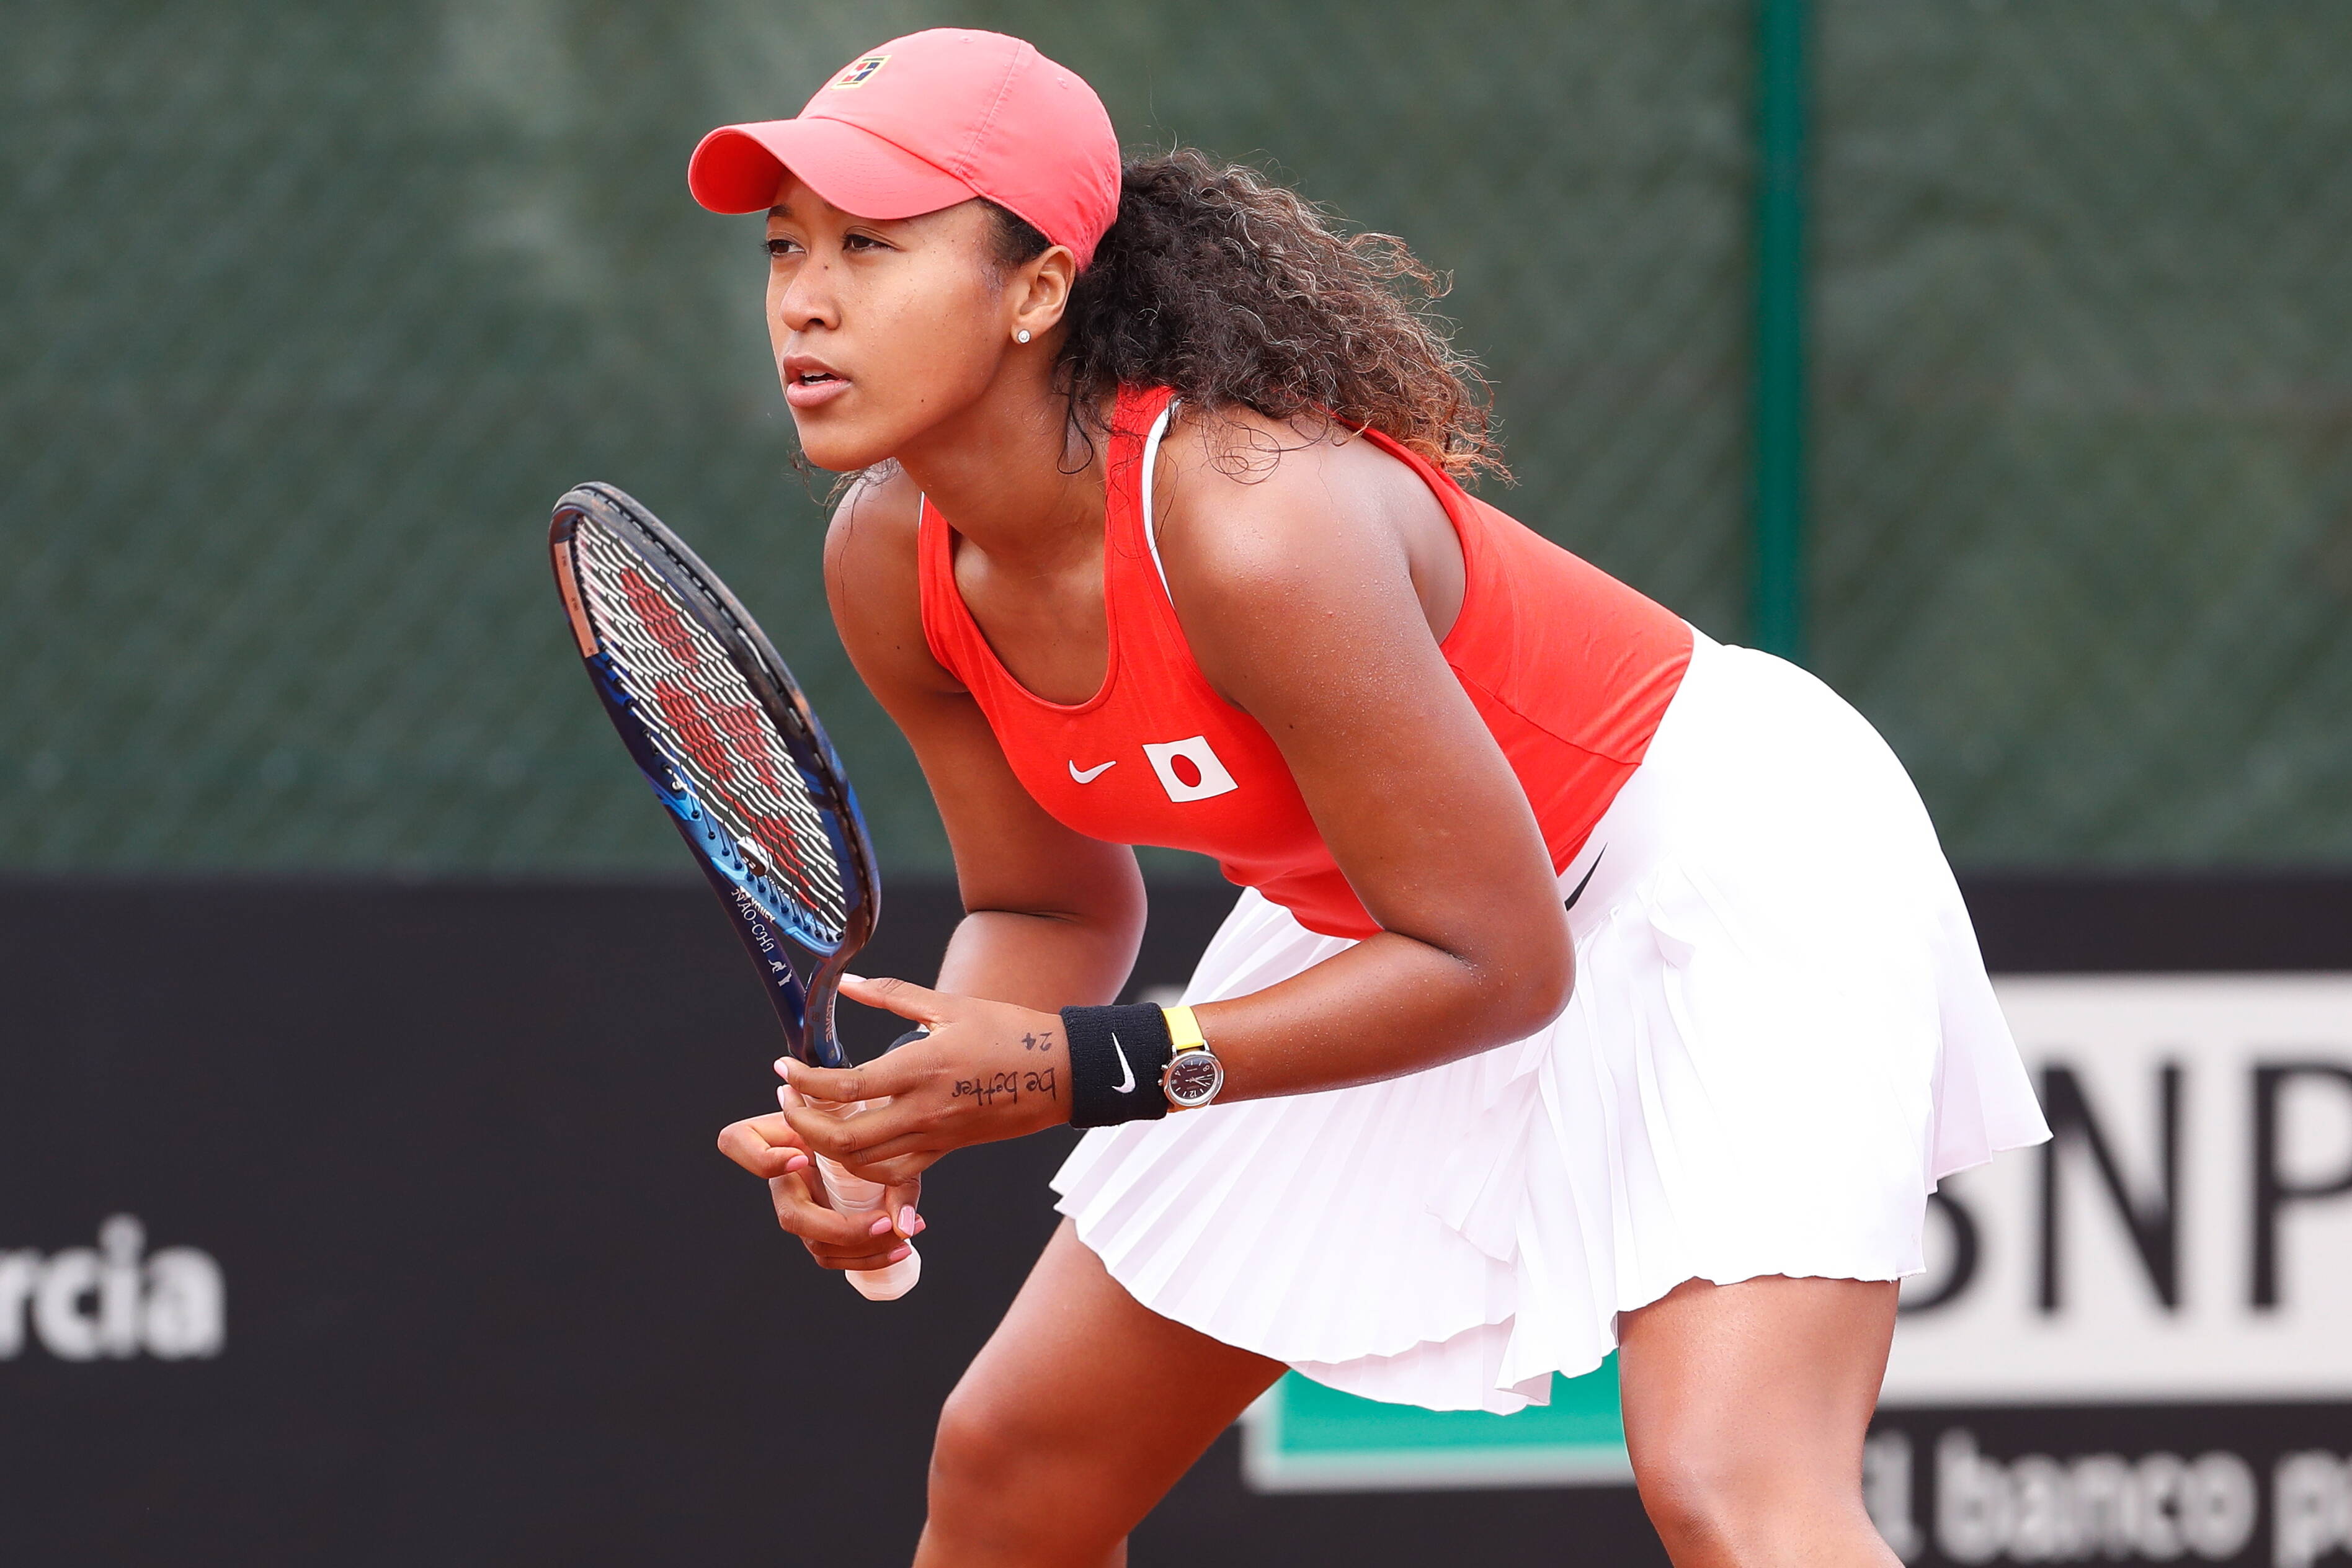 Naomi Osaka and Serena Williams net worth: how much have they made? - AS USA